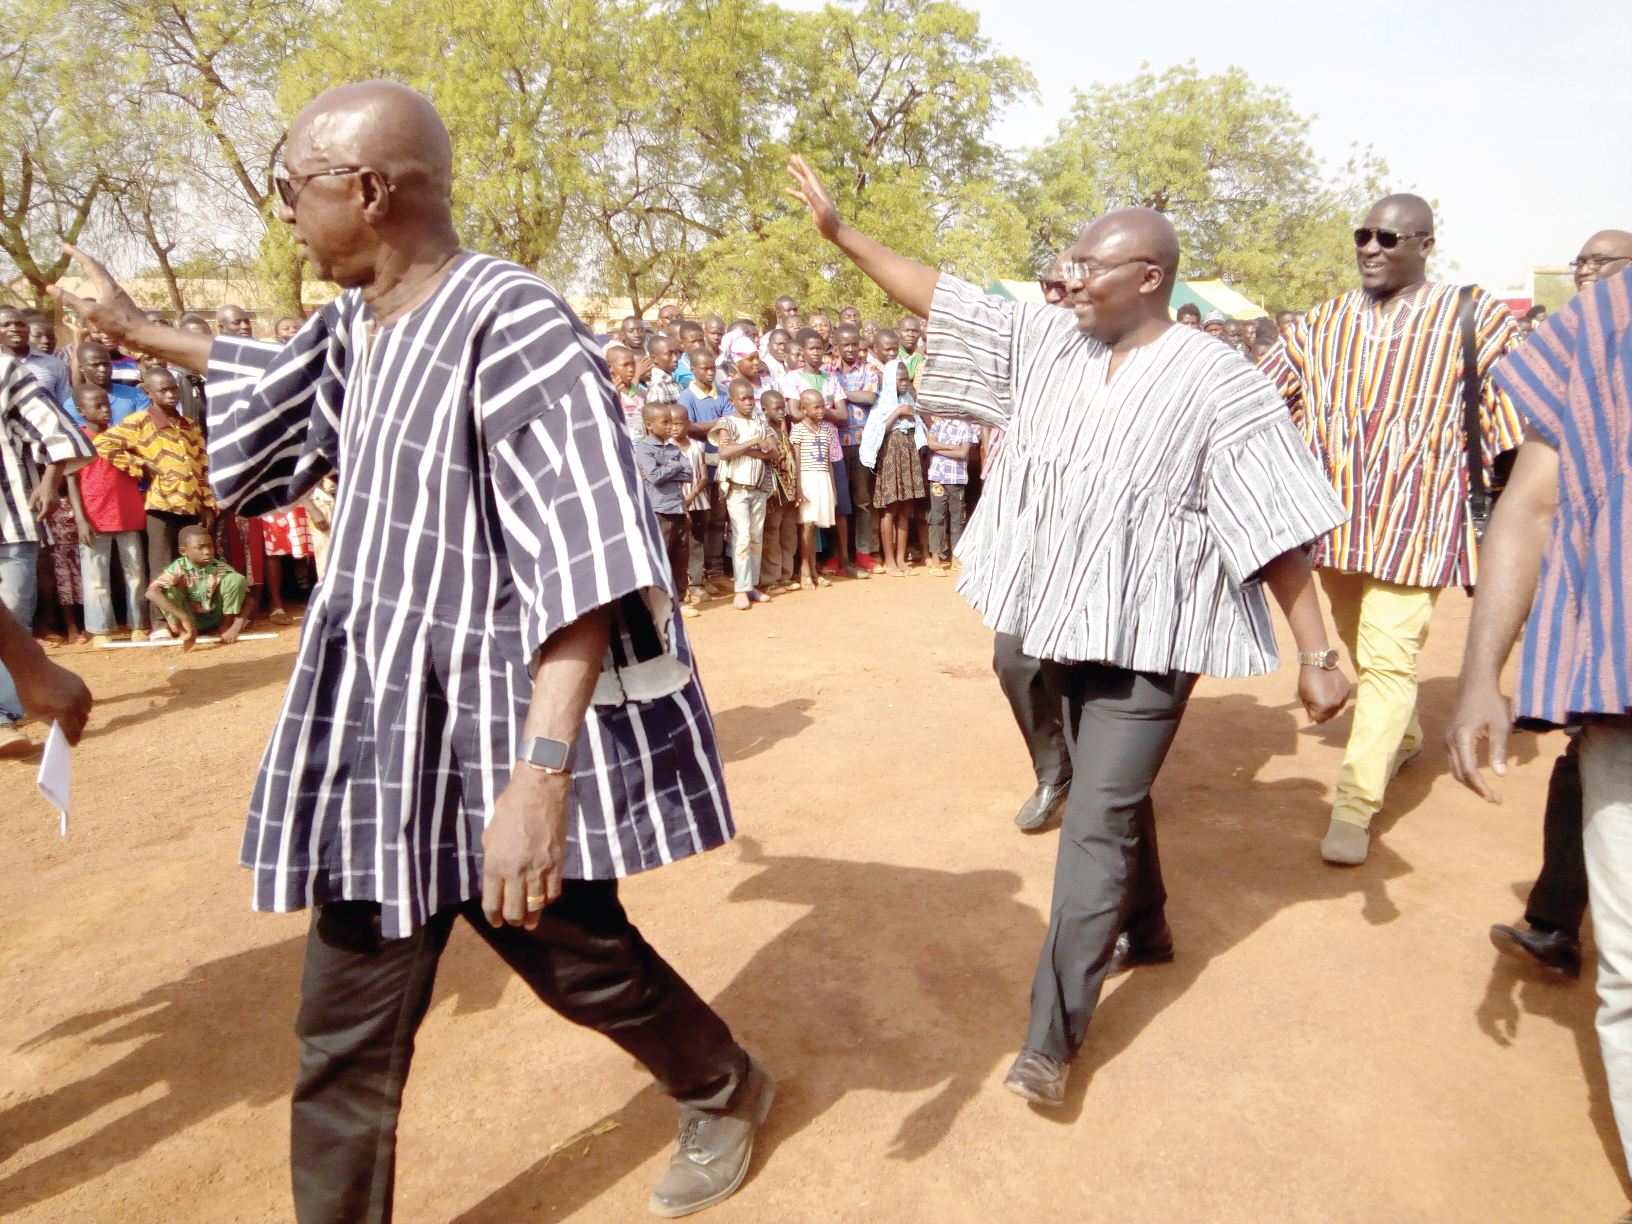  Vice-President Mahamudu Bawumia (2nd left), Mr Ambrose Dery (left), the Minister for the Interior, and some members of their entourage acknowledging cheers from the crowd on their arrival at the durbar  to mark the Kakube Festival. 